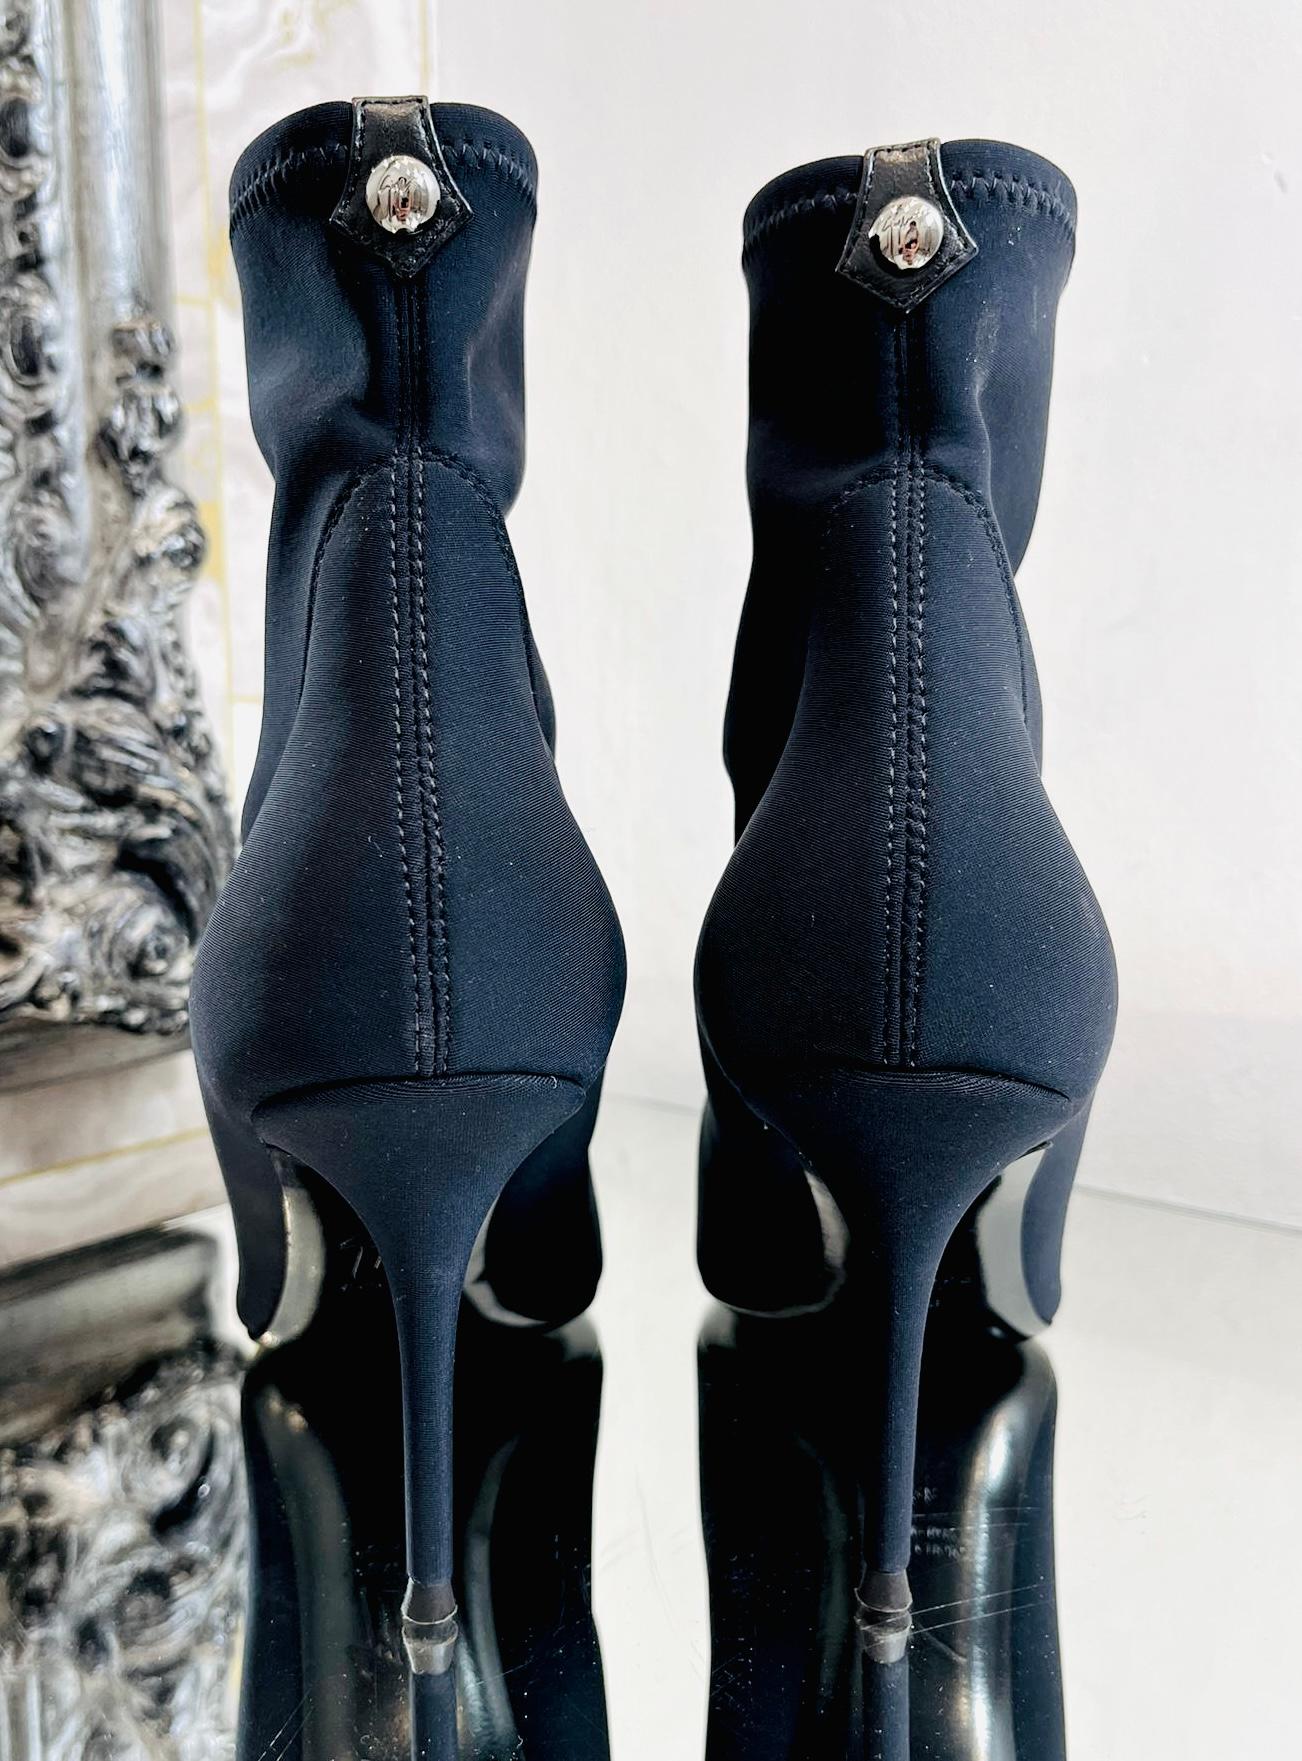 Giuseppe Zanotti Mirea Nylon Ankle Boots In Excellent Condition For Sale In London, GB